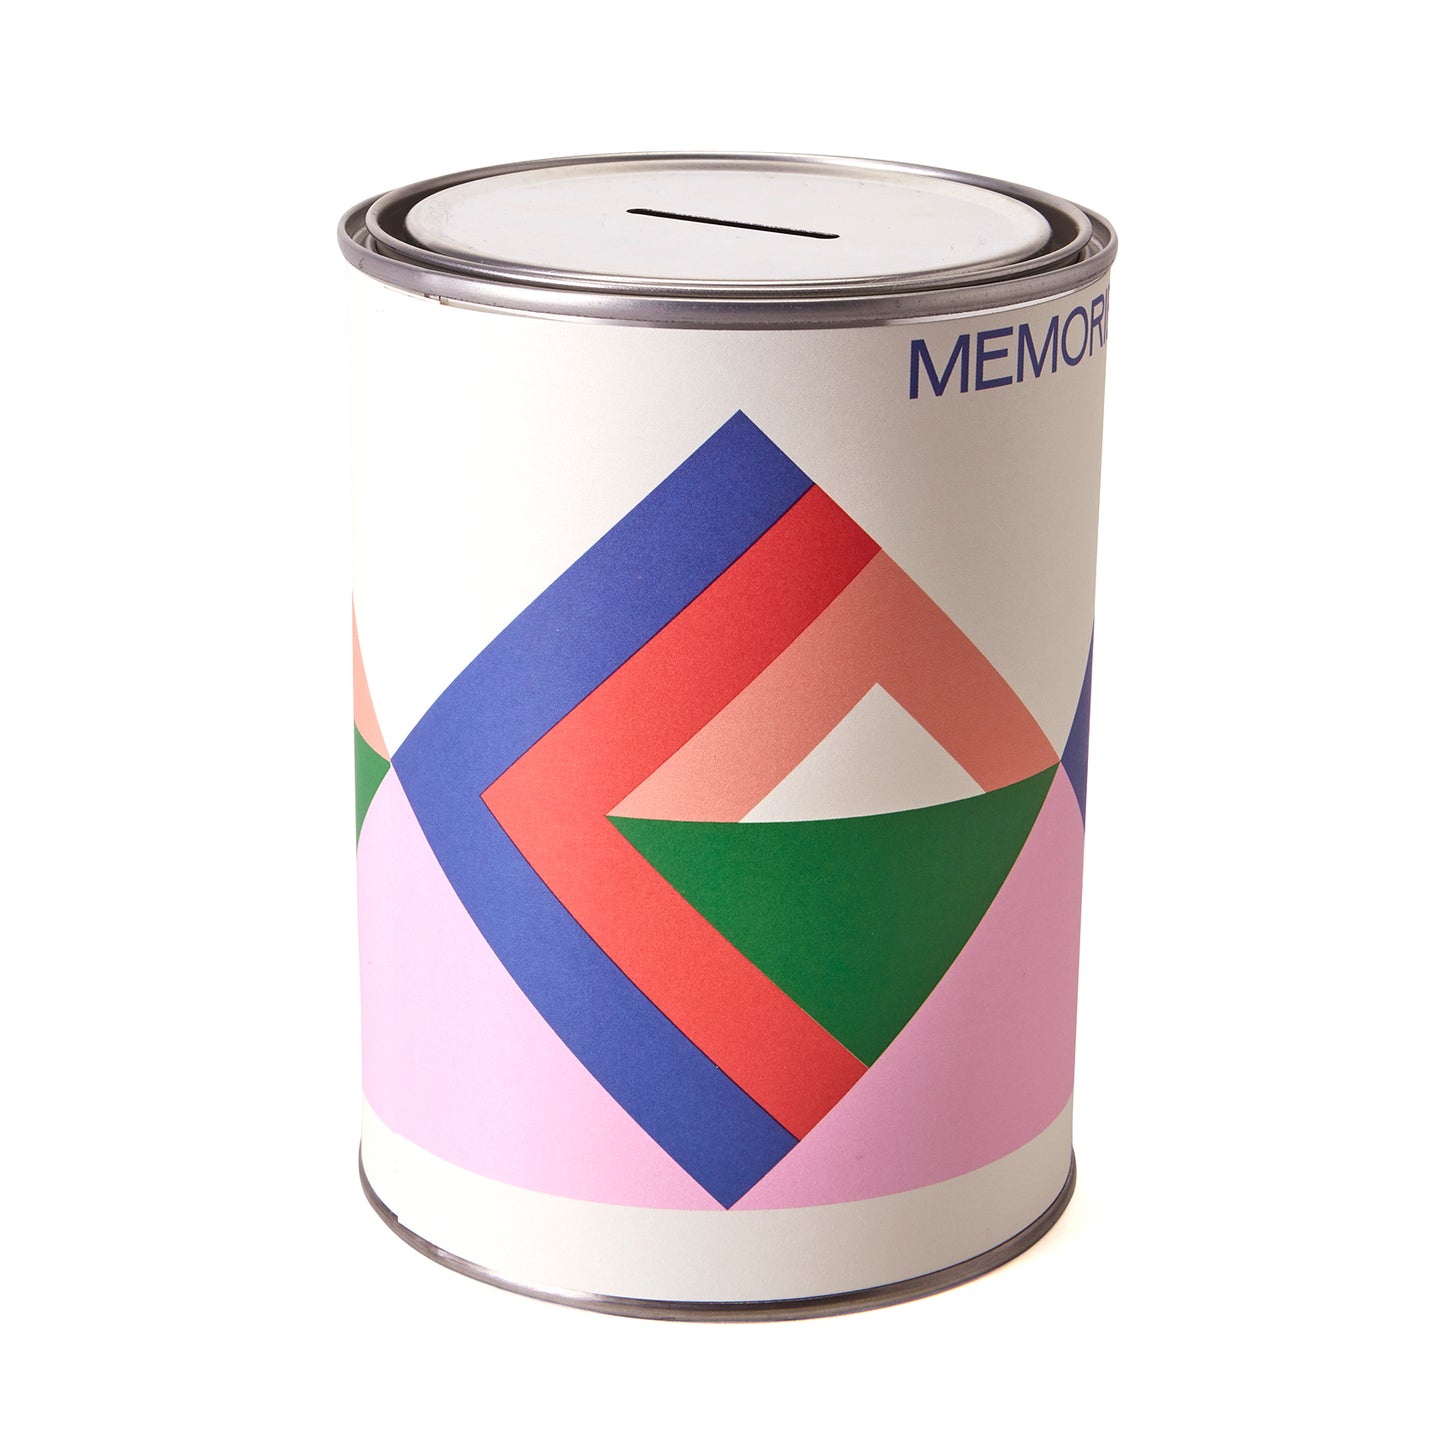 Memories - Large storing Tin - Limited Edition